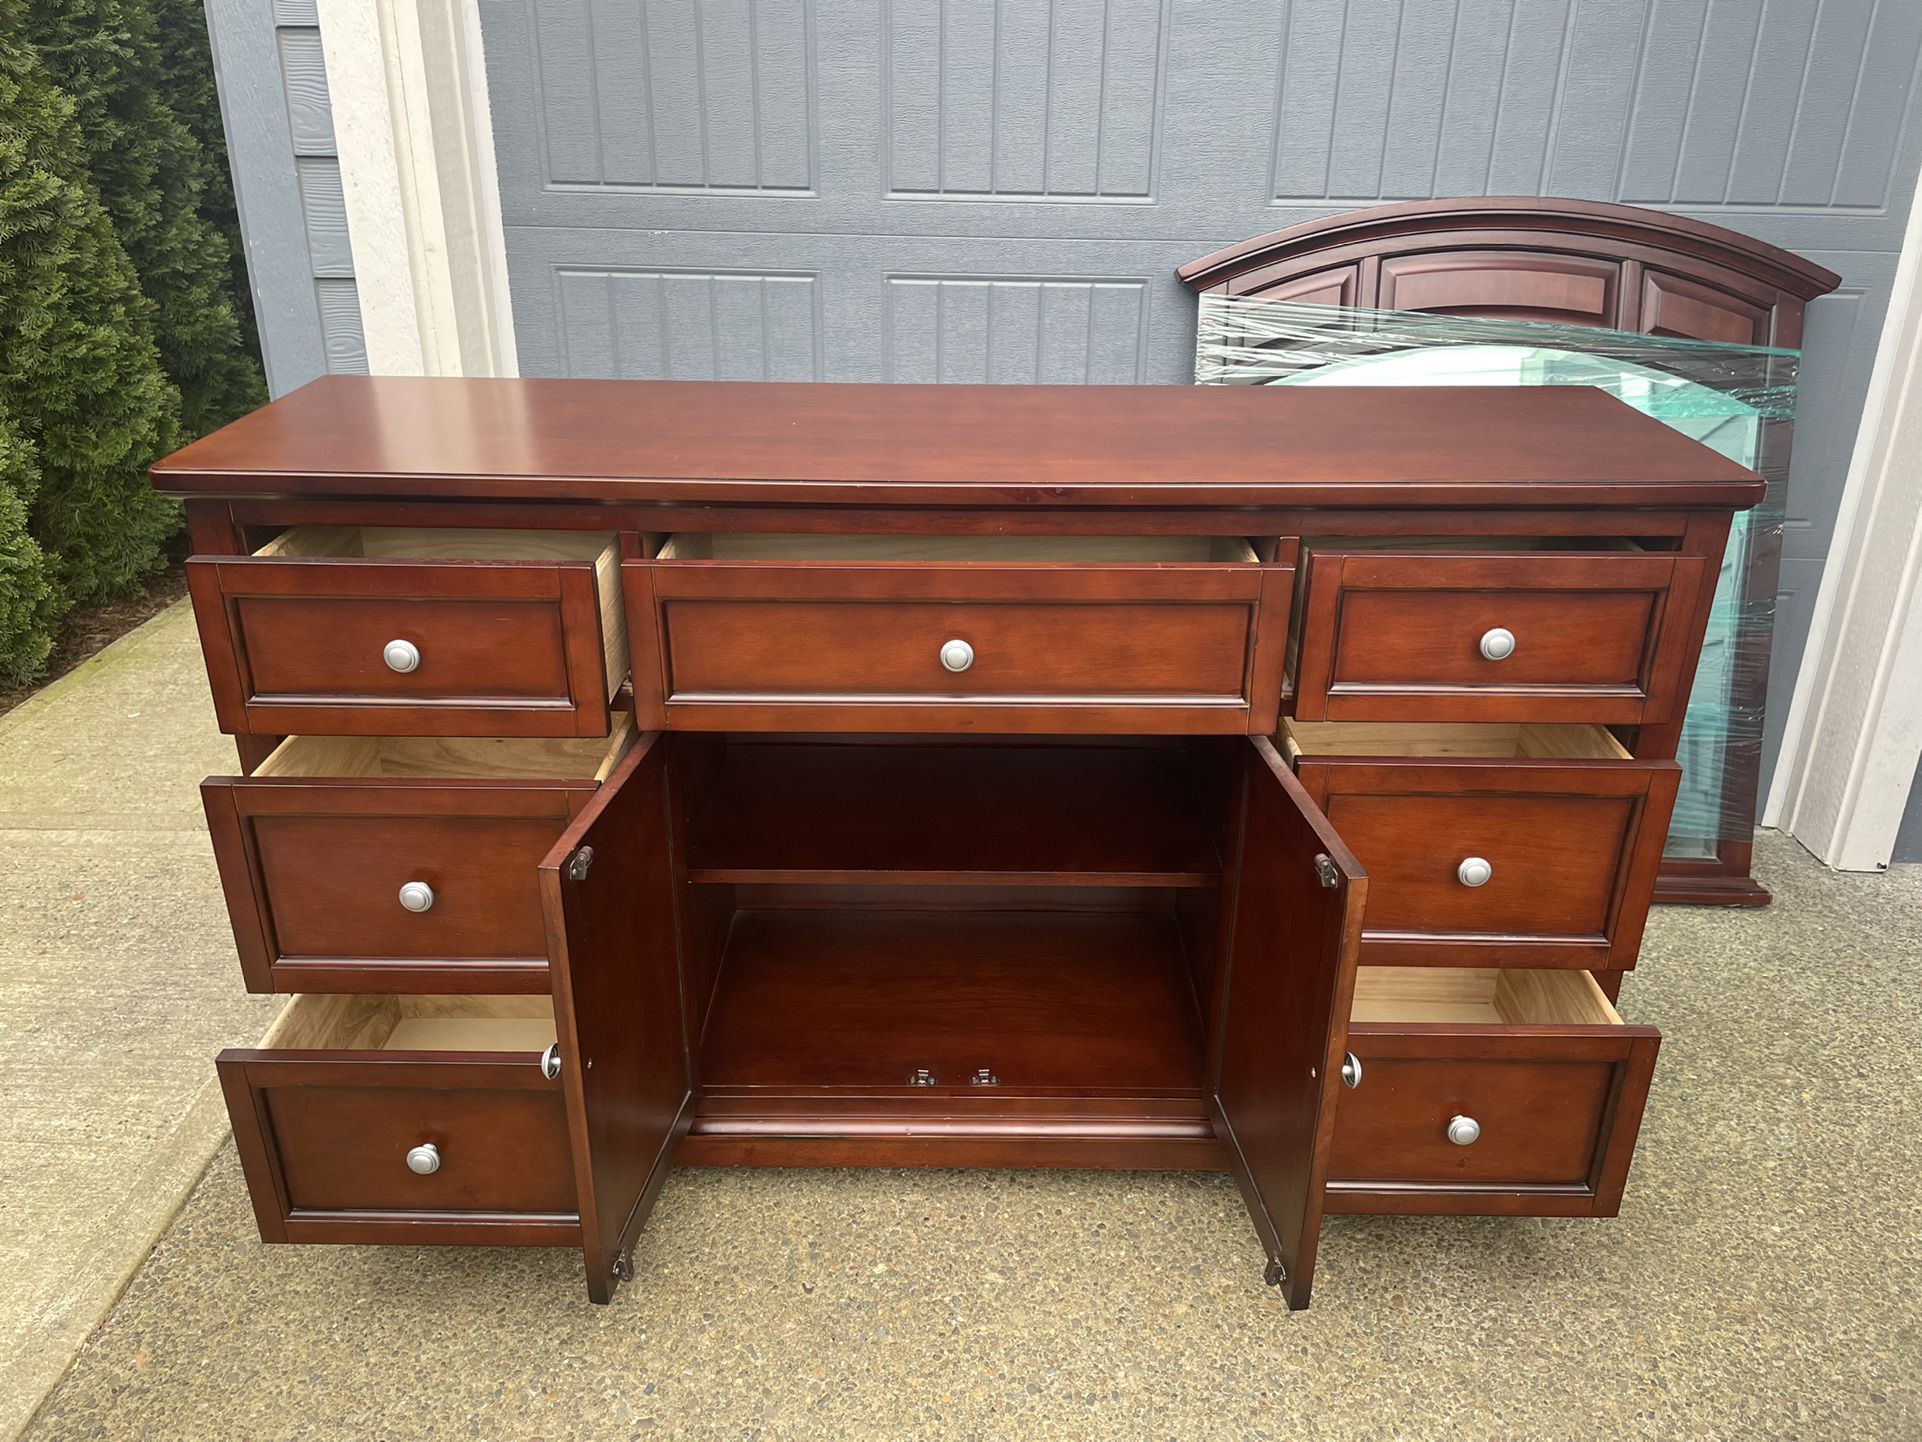 Solid Wood Dresser with mirror in good condition 64 in x 18 in x 37 in